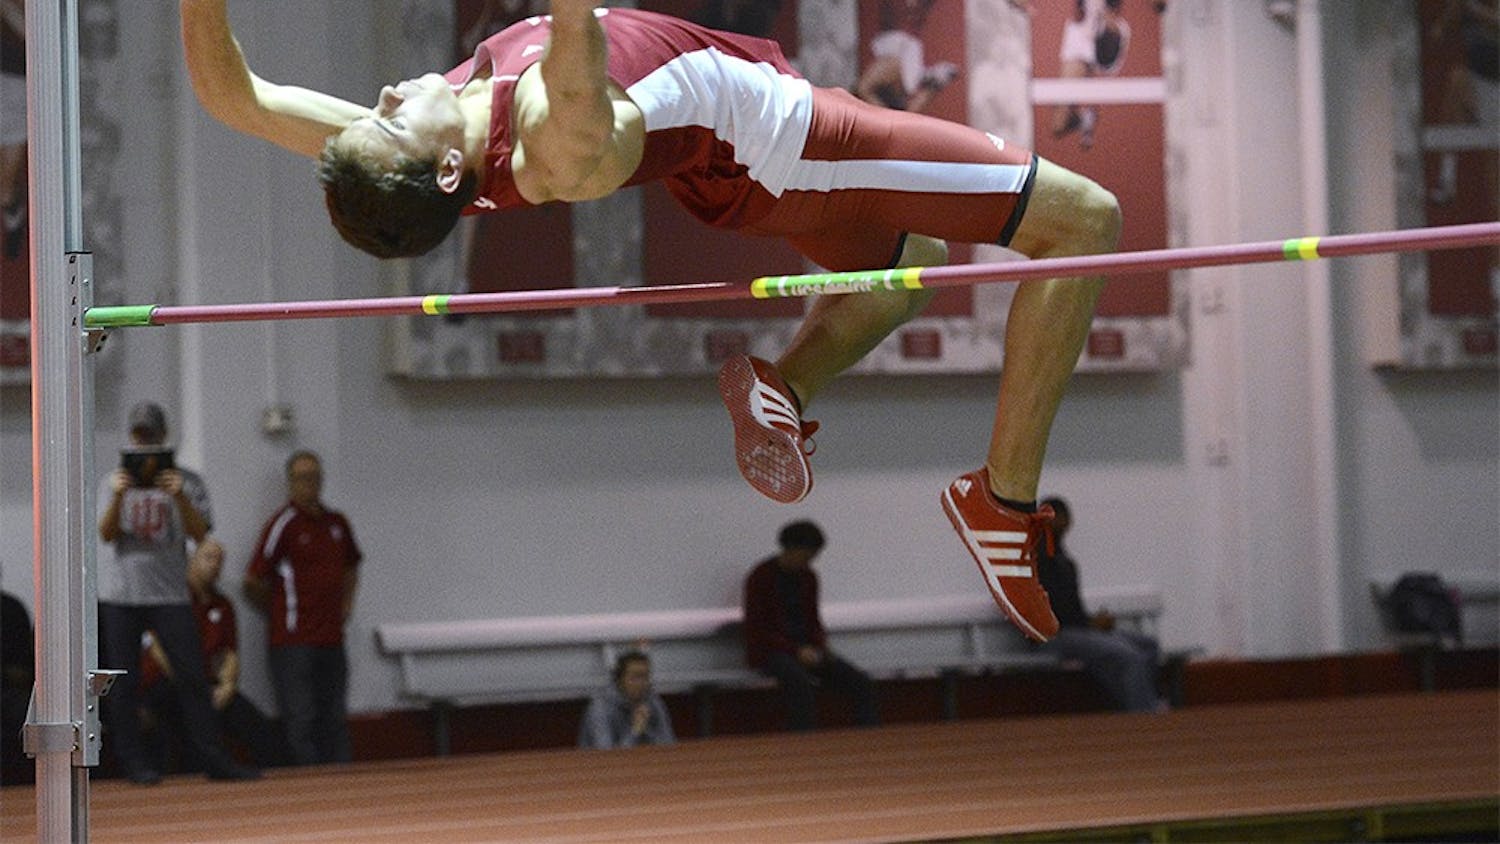 Stephen Keller competes in the High Jump at Hoosier Hills Invitational at Gladstein Fieldhouse on Feb, 14, 2014. 